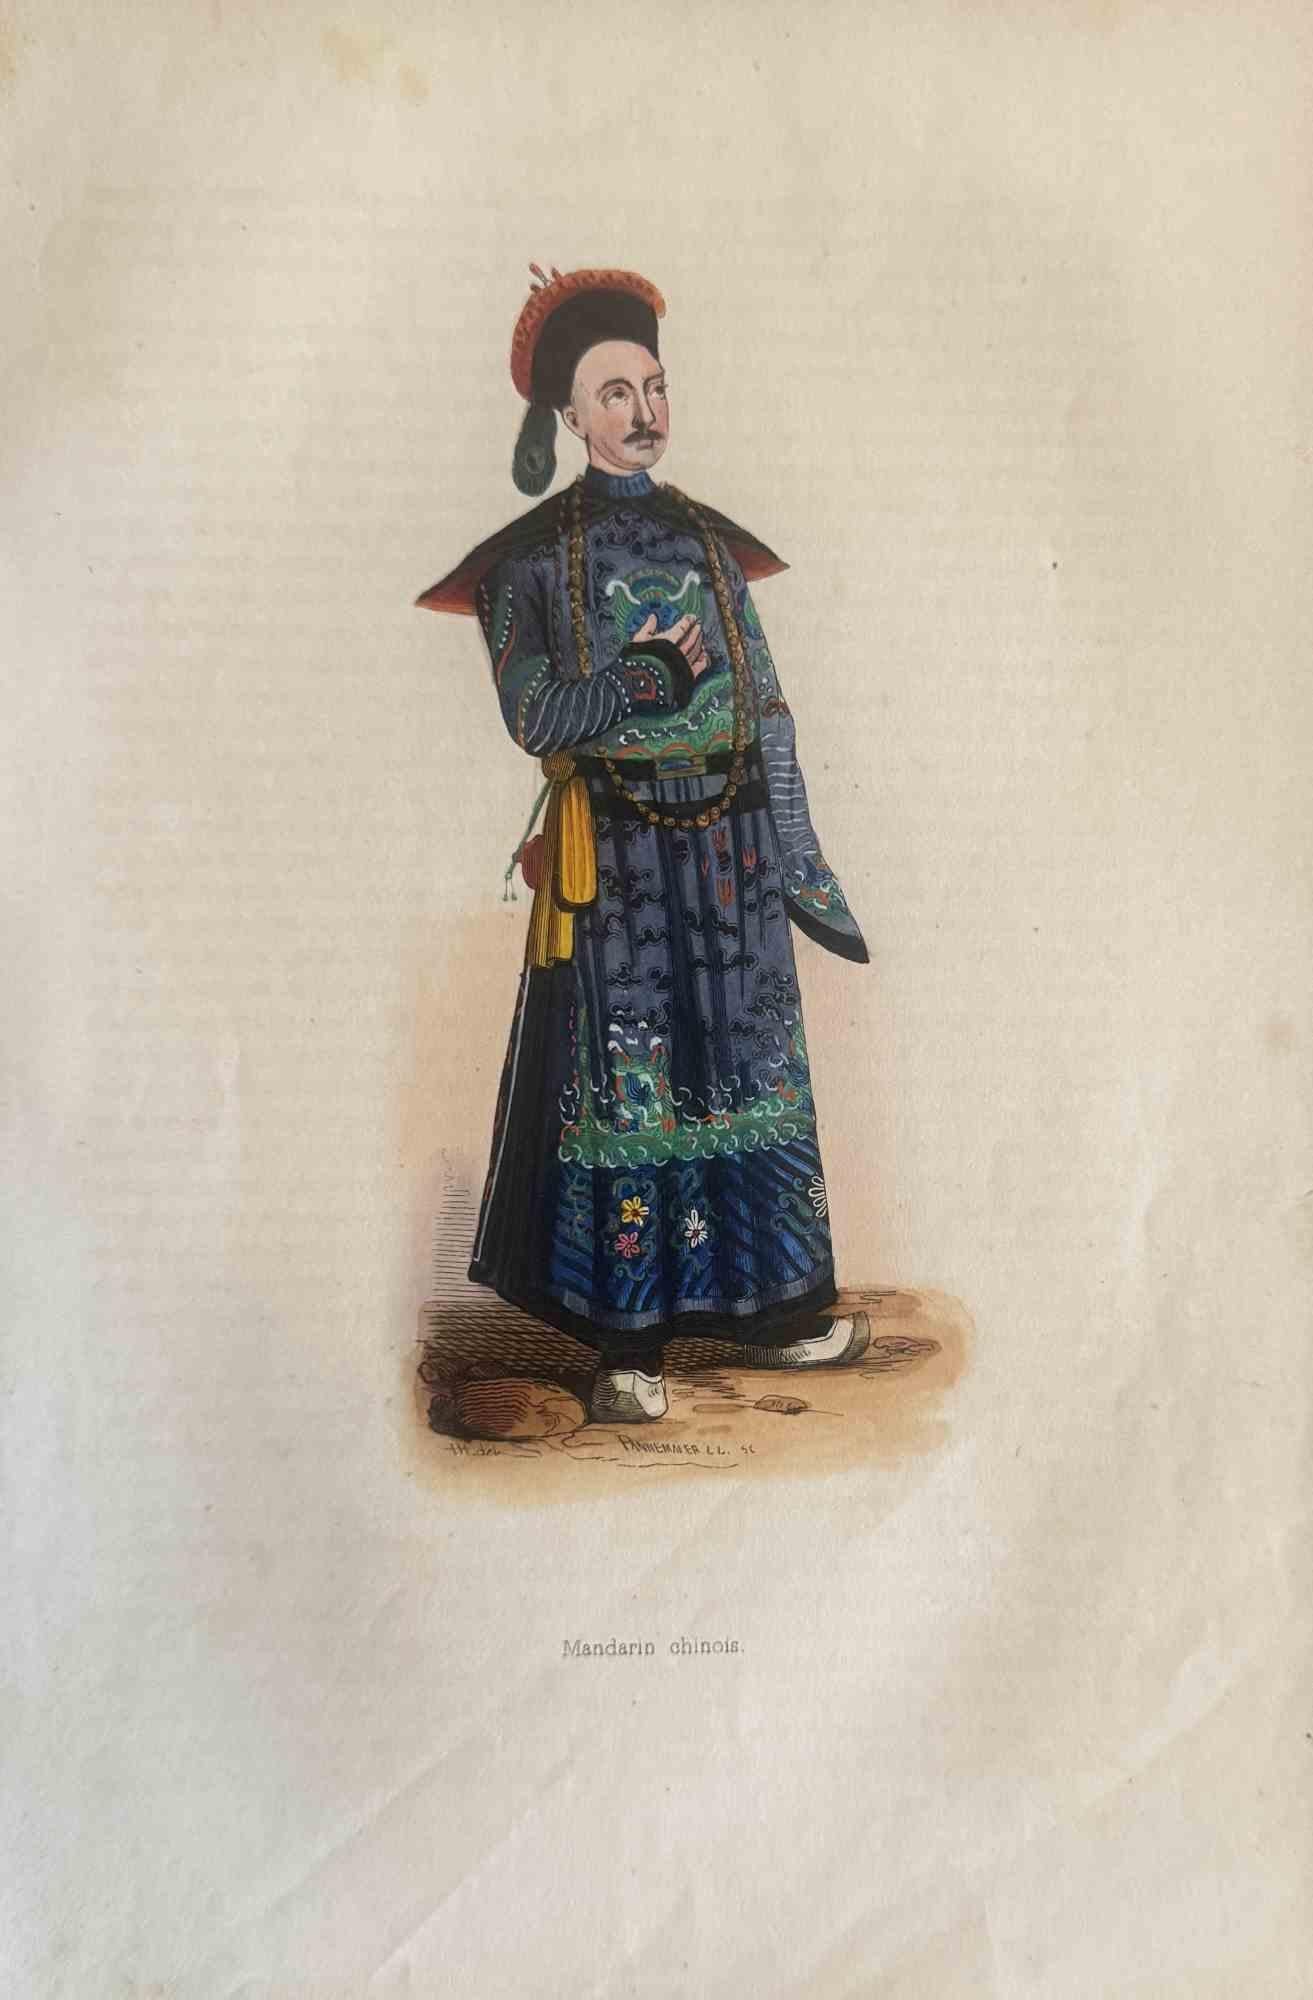 Various Artists Figurative Print - Uses and Customs - Chinese - Lithograph - 1862